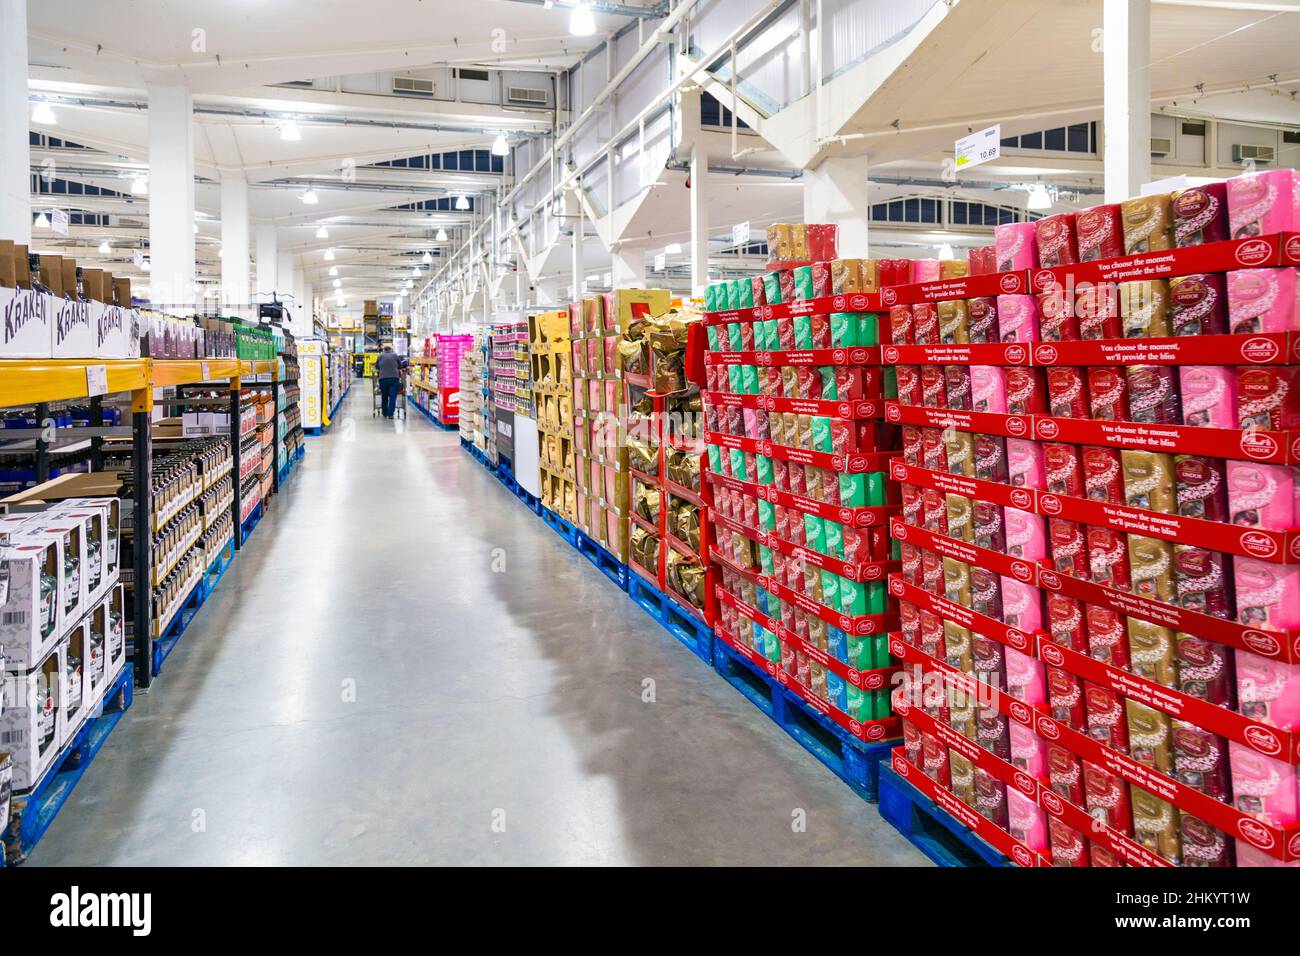 Confectionaty and drinks isle at wholesale supermarket Costco Stock Photo